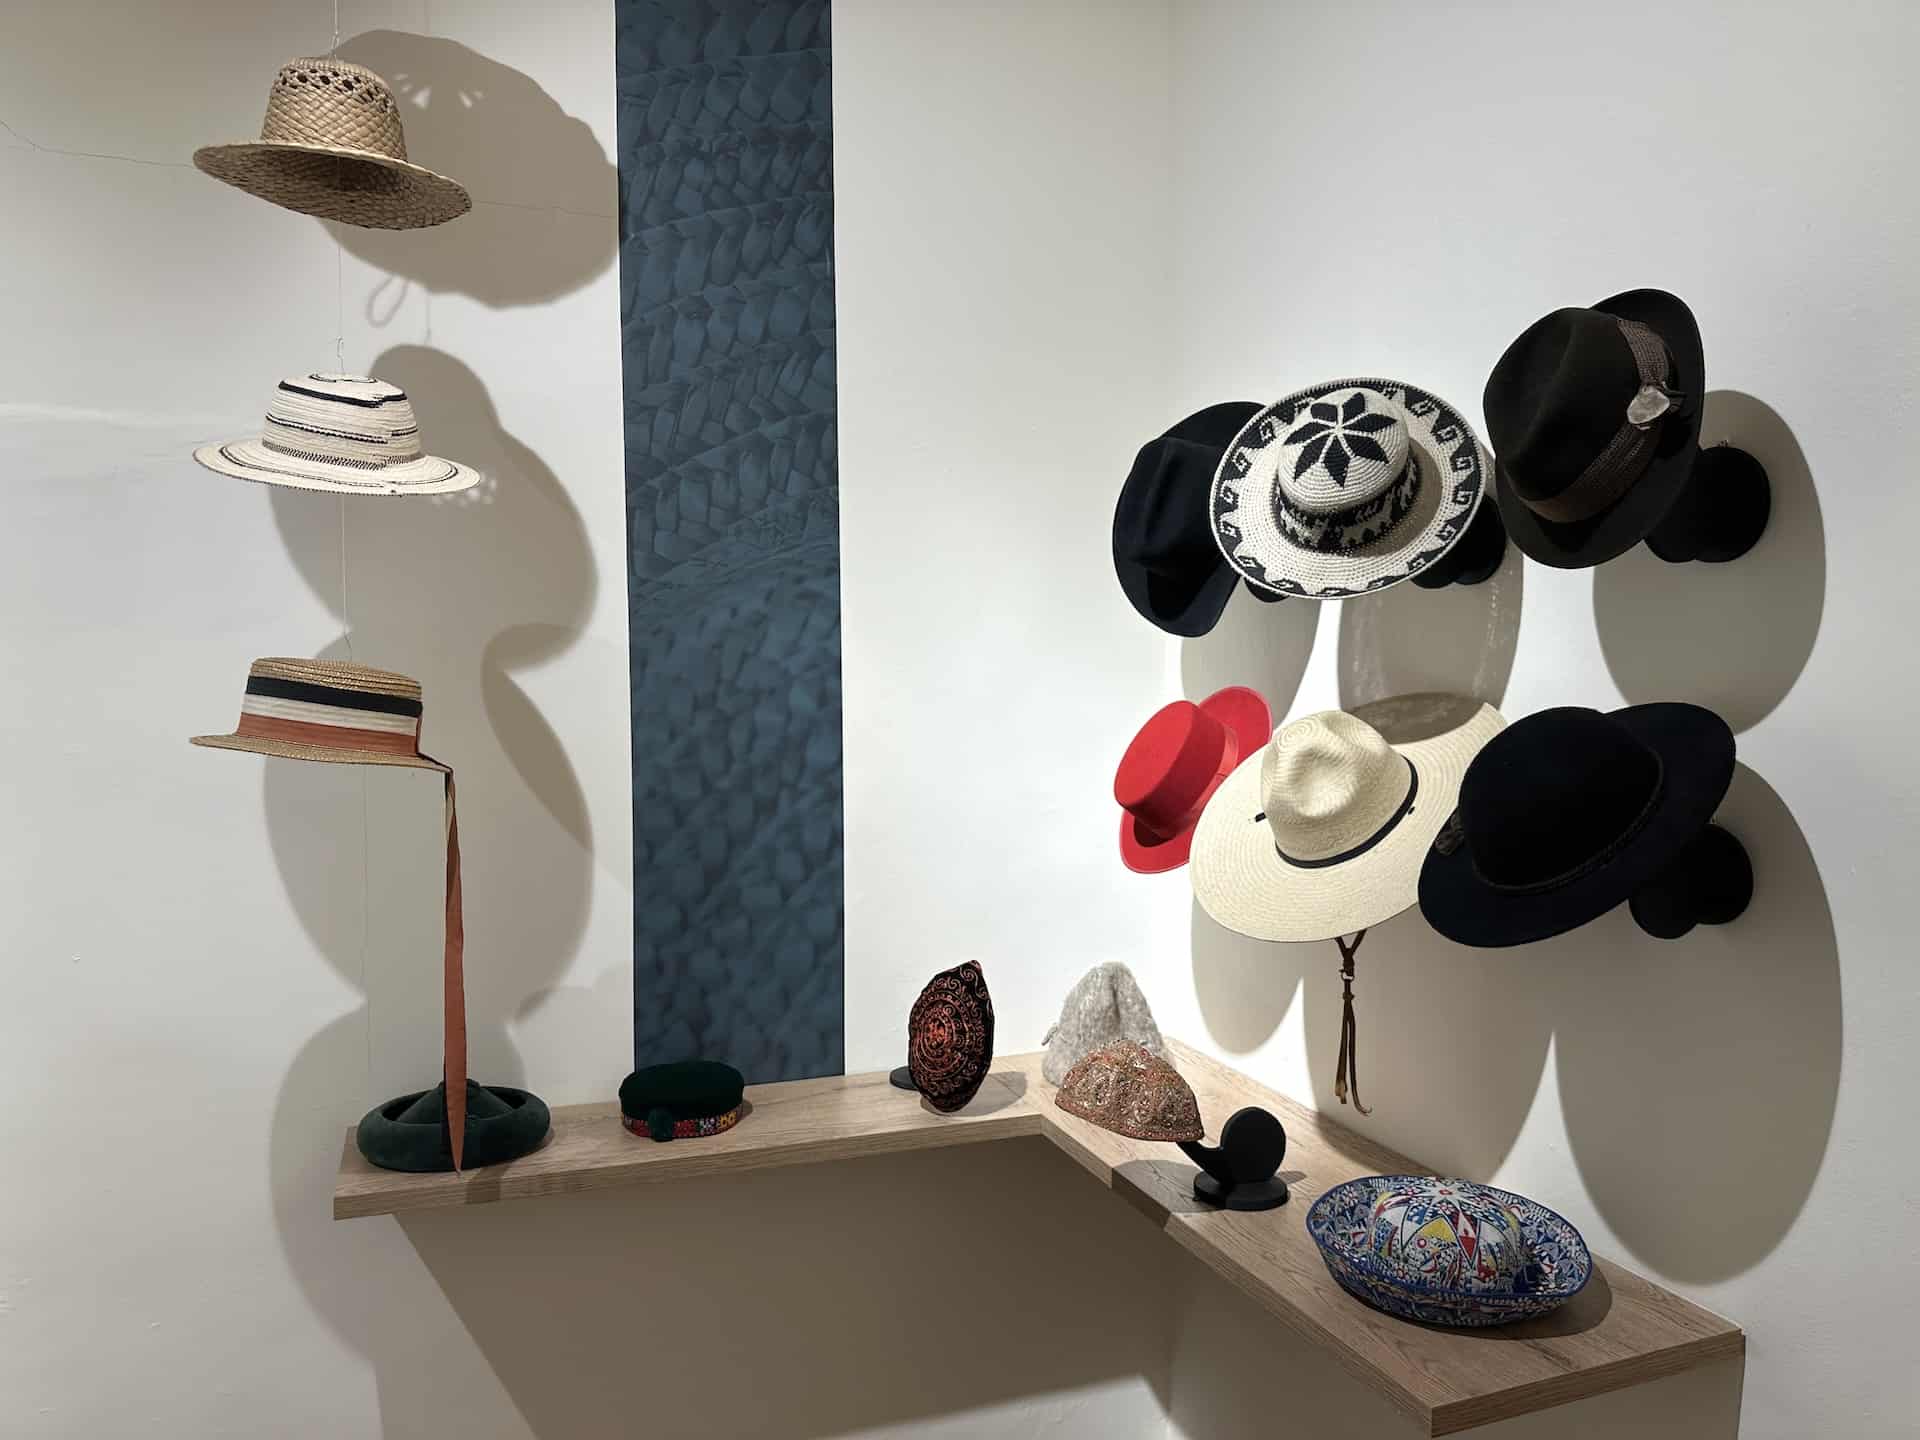 Hats from around the world at the National Museum of Hats